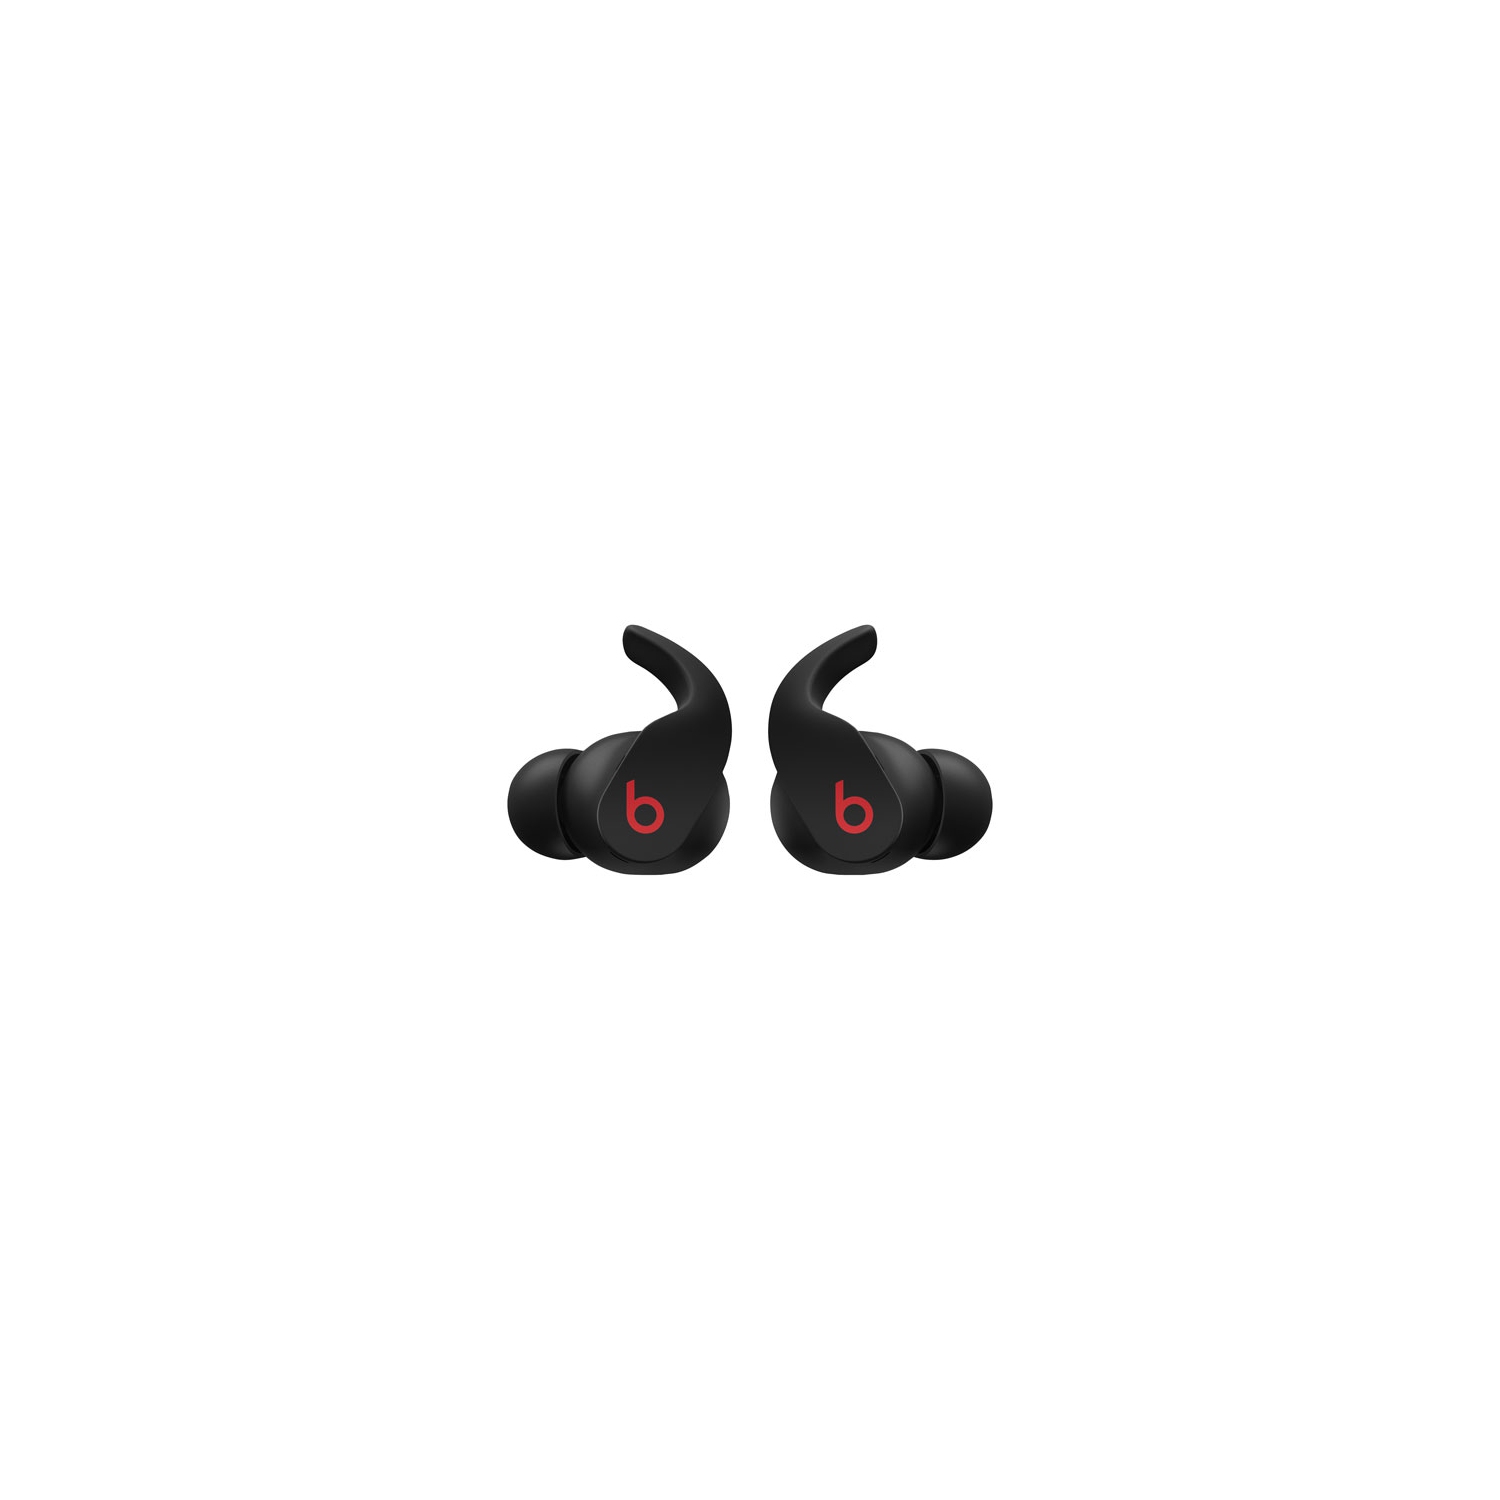 Refurbished (Excellent) - Beats By Dr. Dre Fit Pro In-Ear Noise Cancelling True Wireless Earbuds - Black